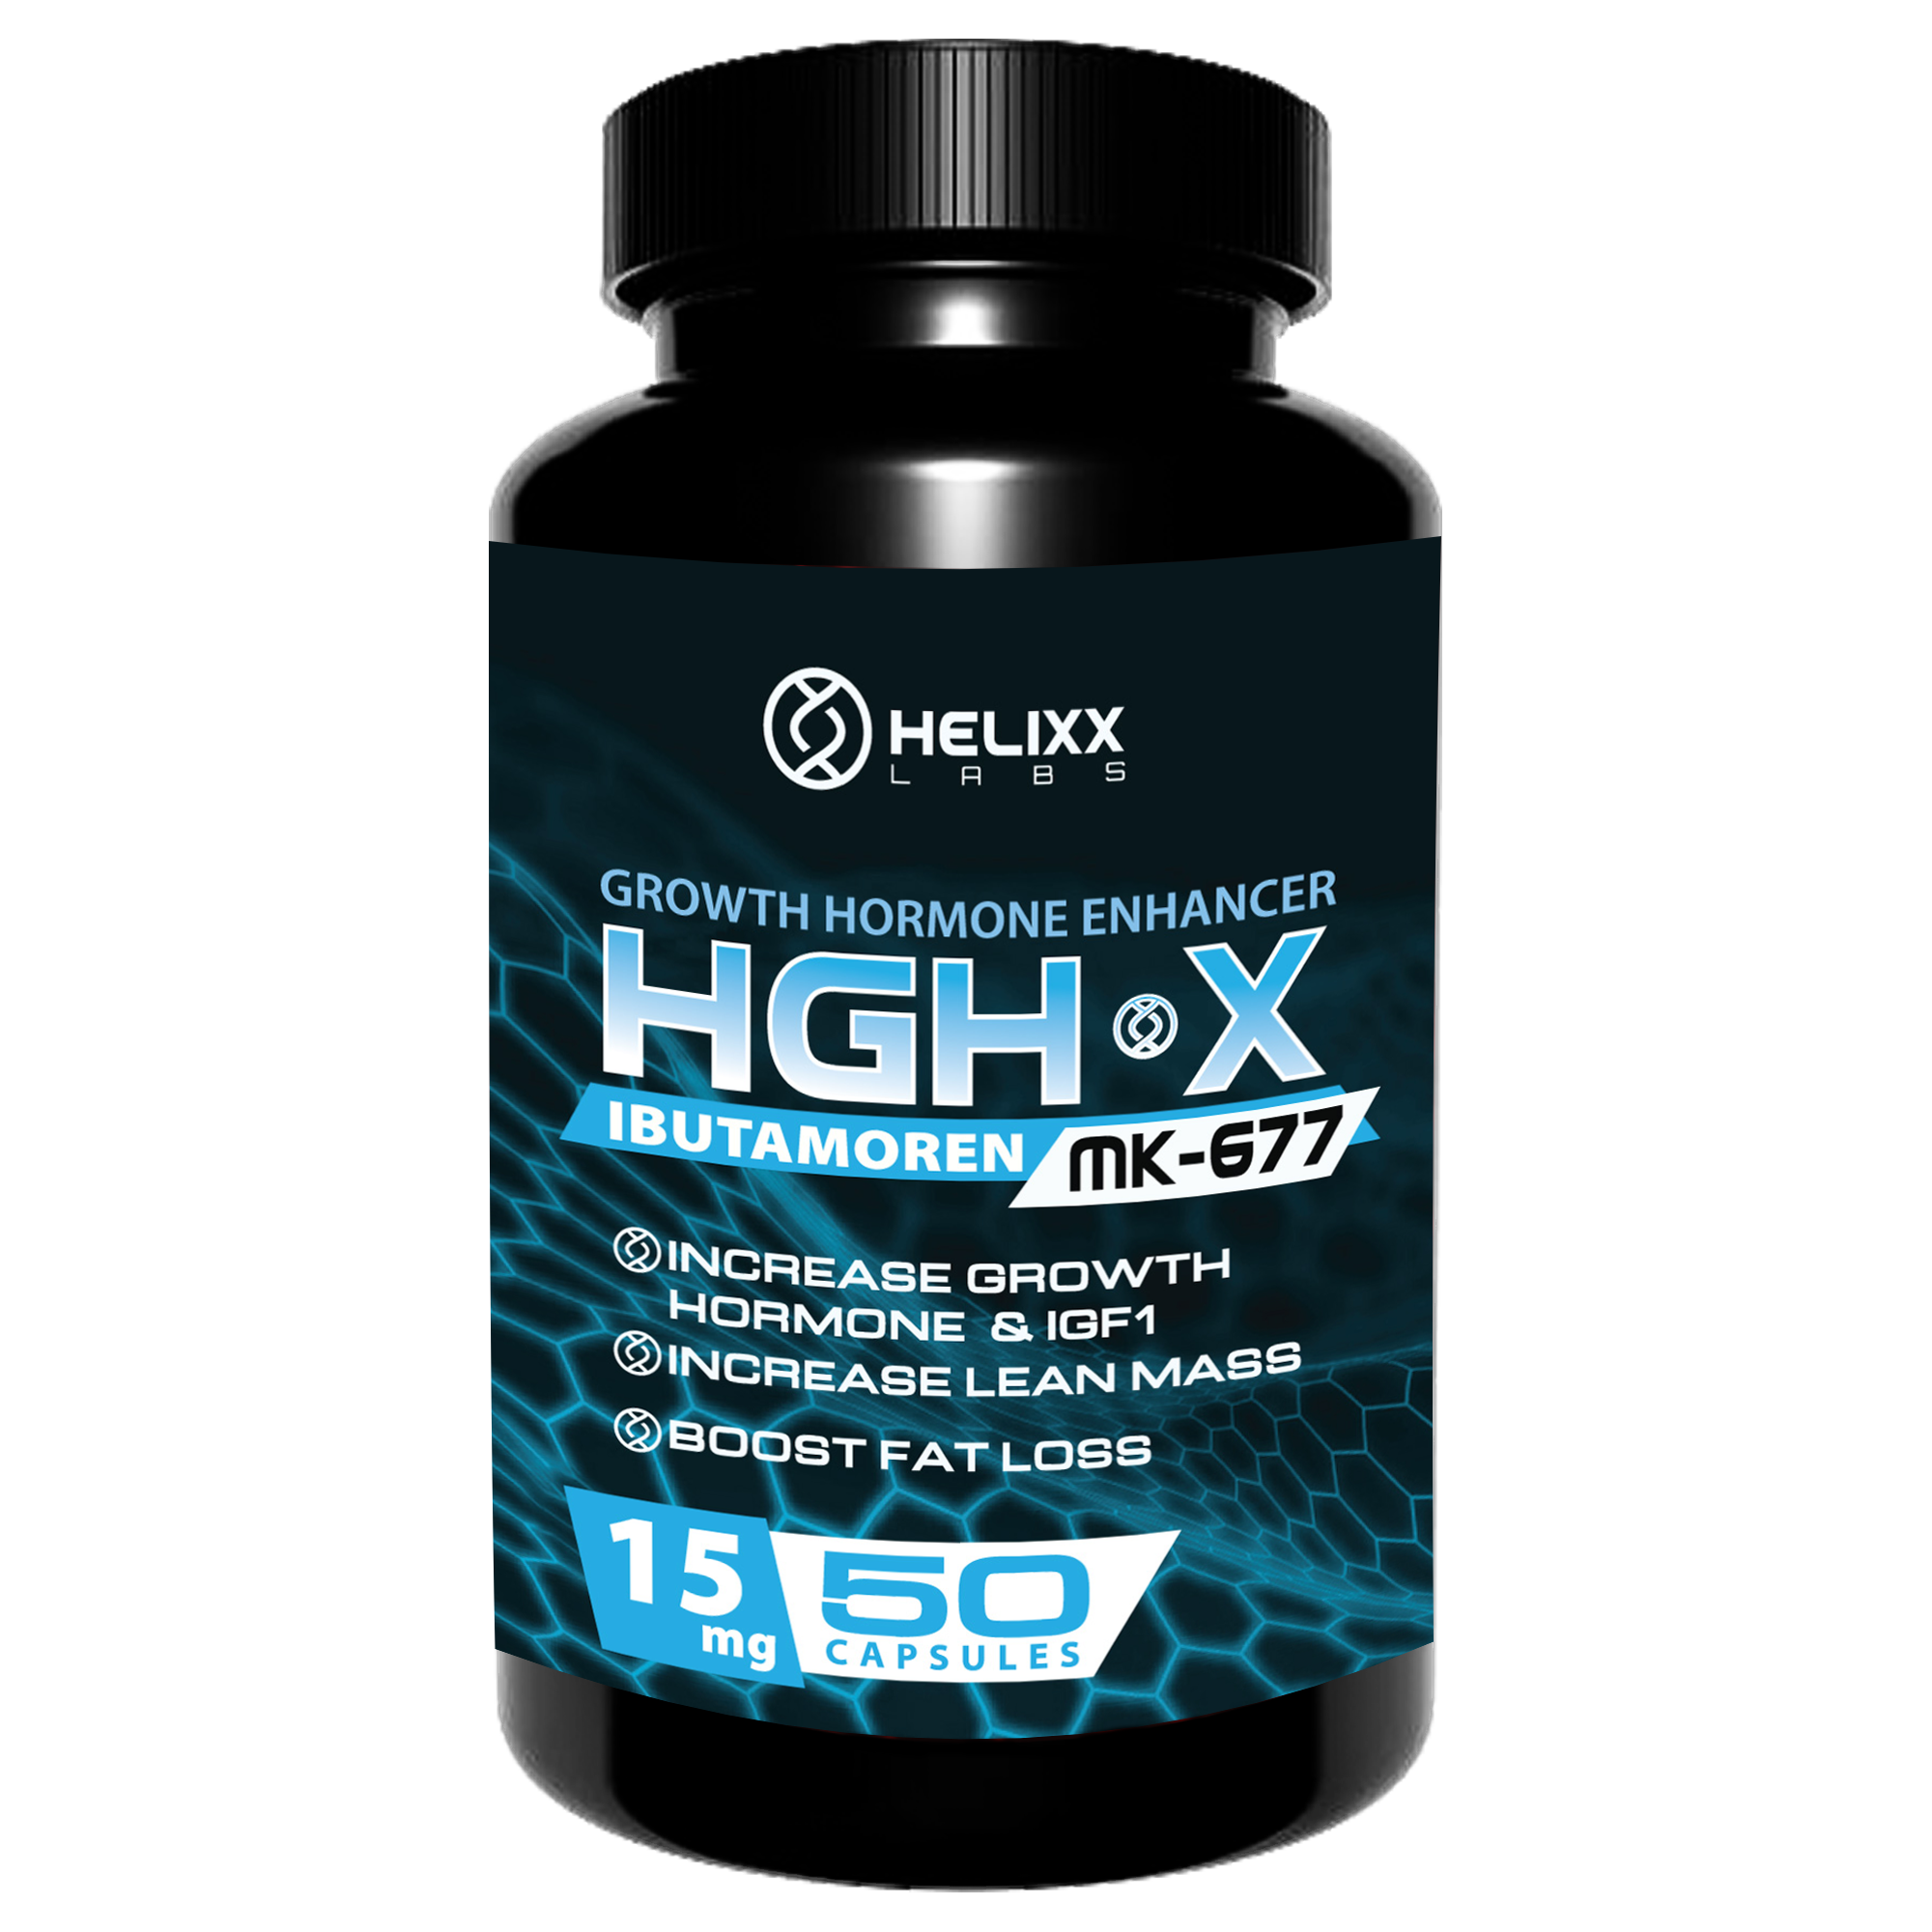 Helixx HGH X 15mg – 50 capsules BEST BY MAY 2024 Helixx Top Nutrition Canada